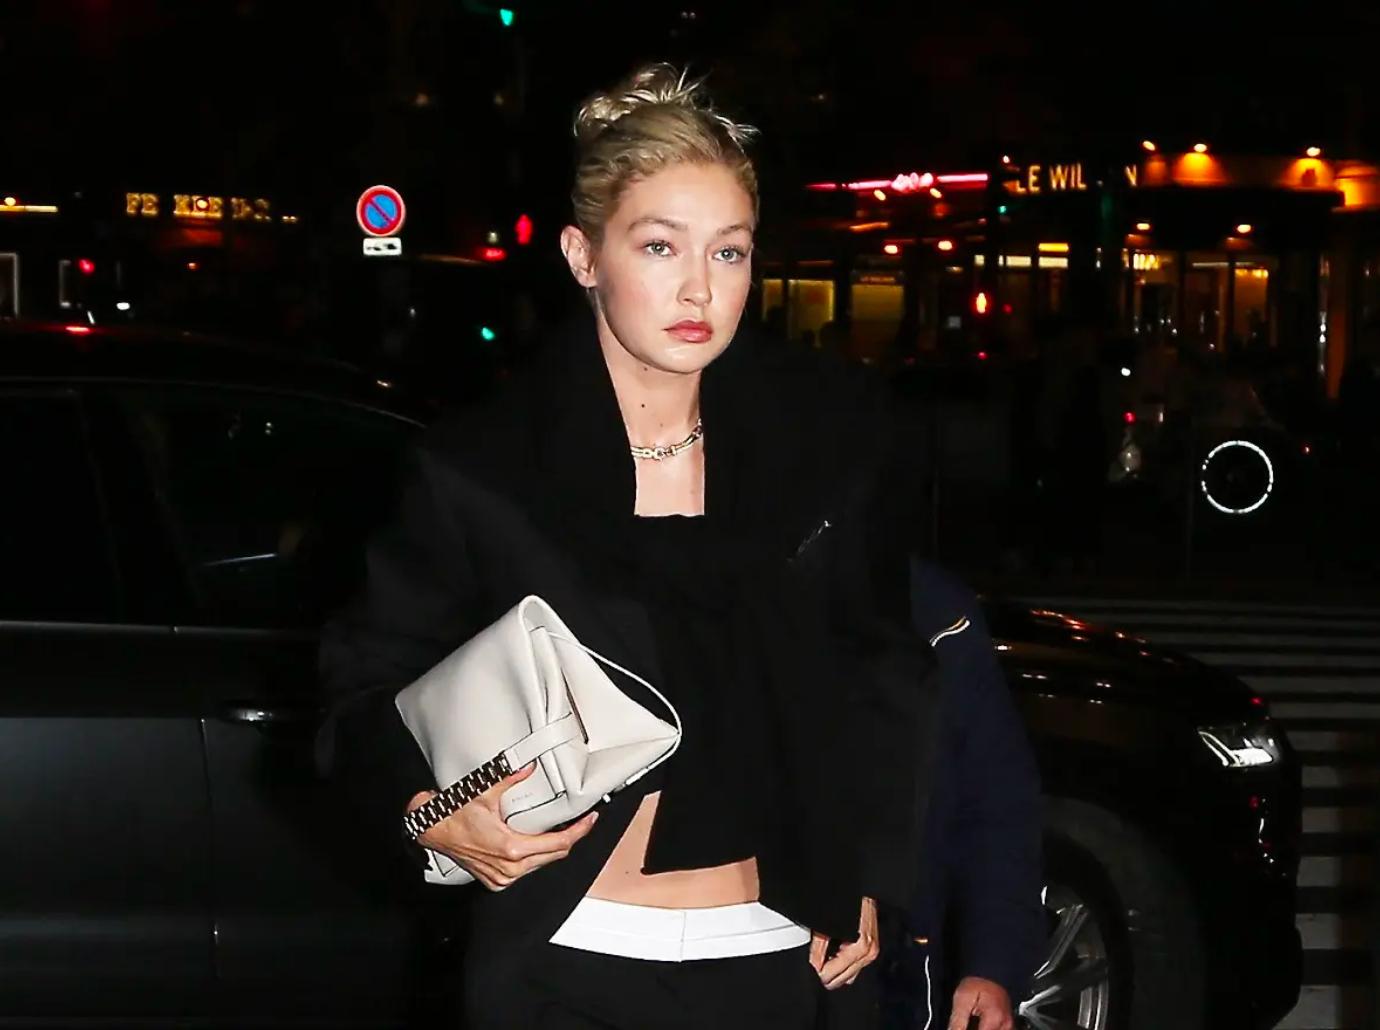 This $80 purse, adored by supermodel Gigi Hadid, makes a great gift